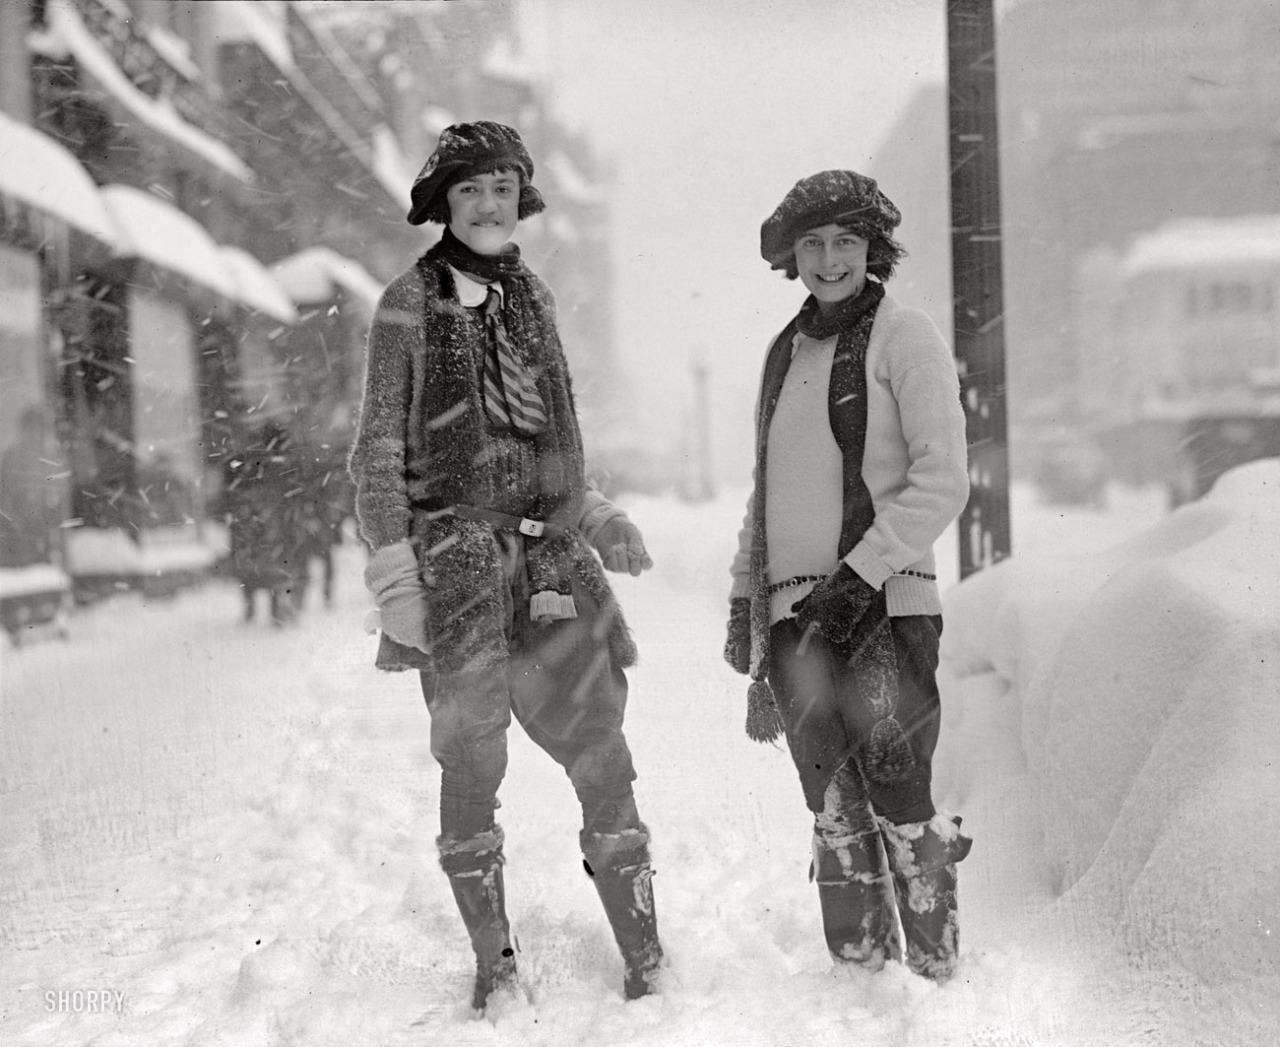 Young ladies during a heavy snowstorm in Washington DC, US in 1922.